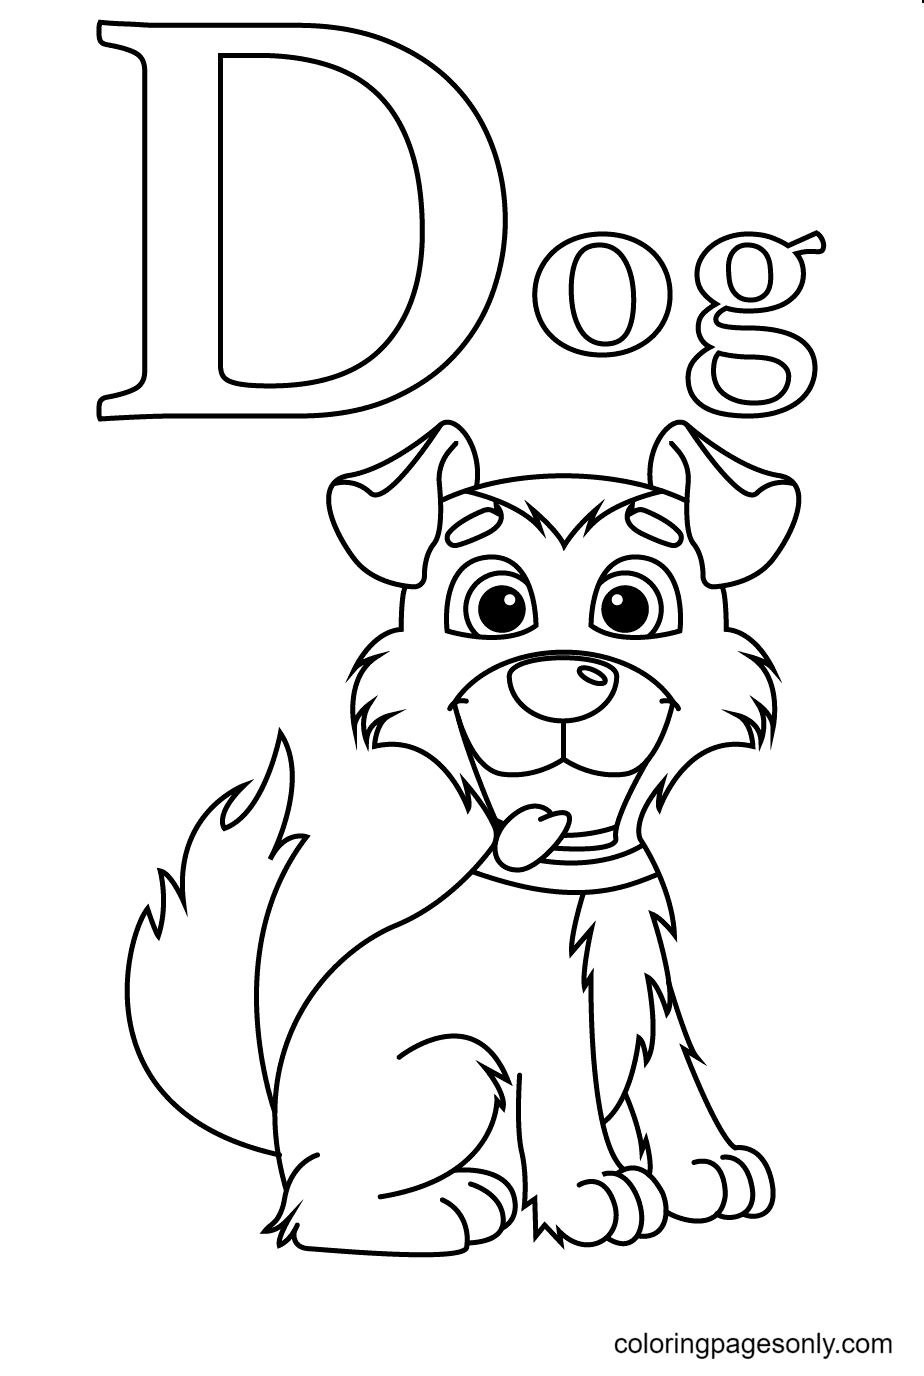 Adorable Dog With Letter D Coloring Page